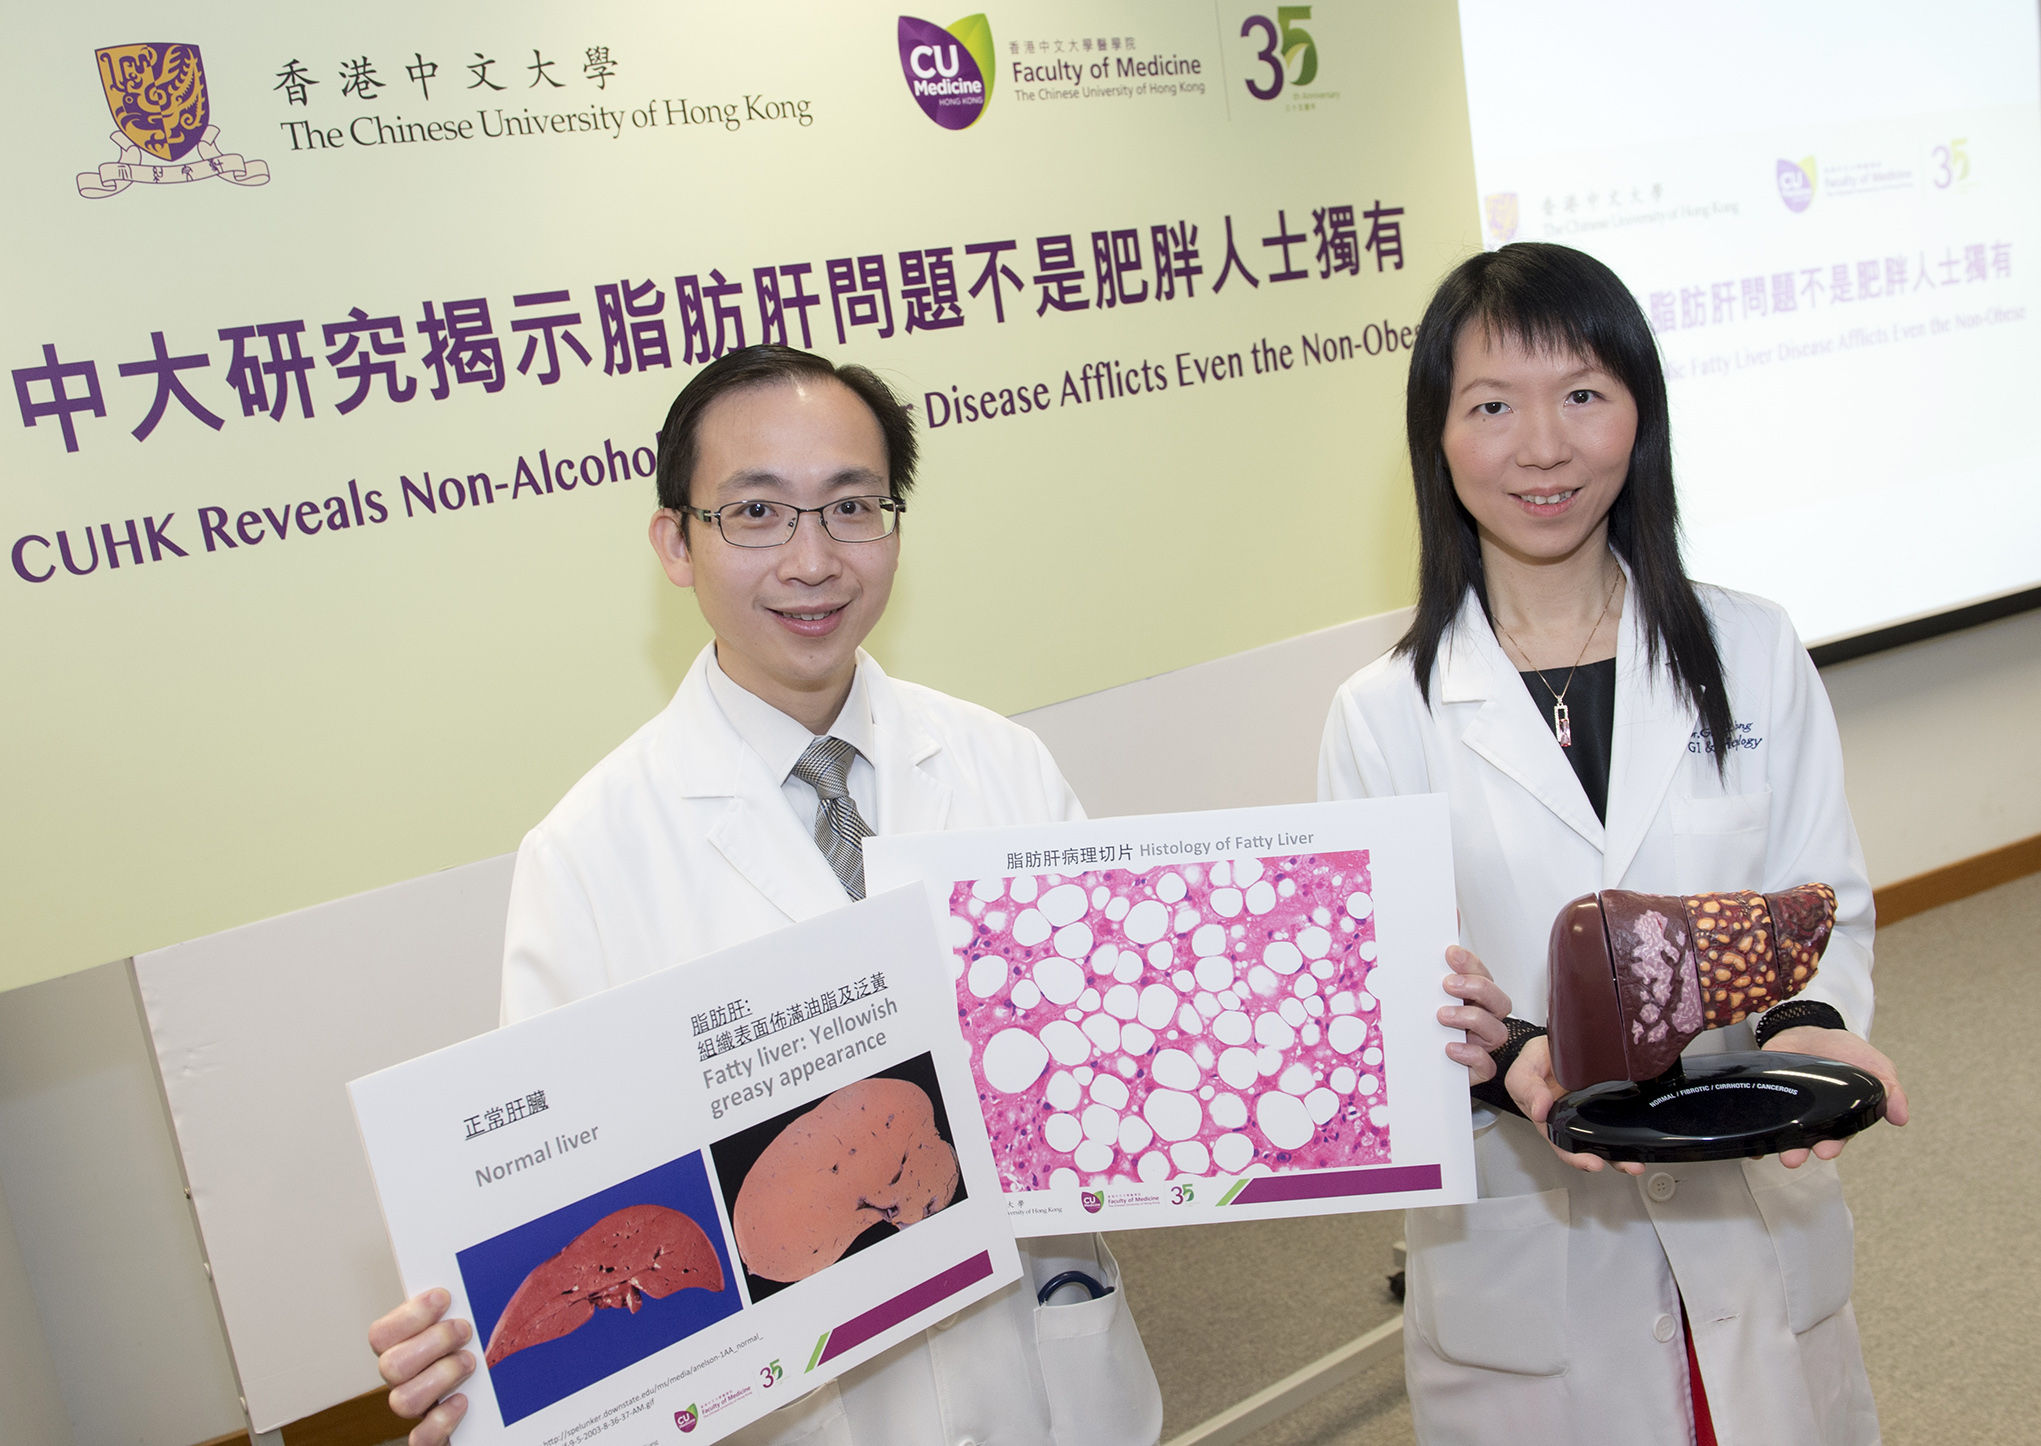 Studies conducted by CUHK Faculty of Medicine reveal that 1 out of 5 non-obese subjects suffer from non-alcoholic fatty liver disease. Some cases may even develop severe liver fibrosis. (Left) Prof. Vincent WONG and Prof. Grace WONG, Division of Gastroenterology and Hepatology, Department of Medicine and Therapeutics. 